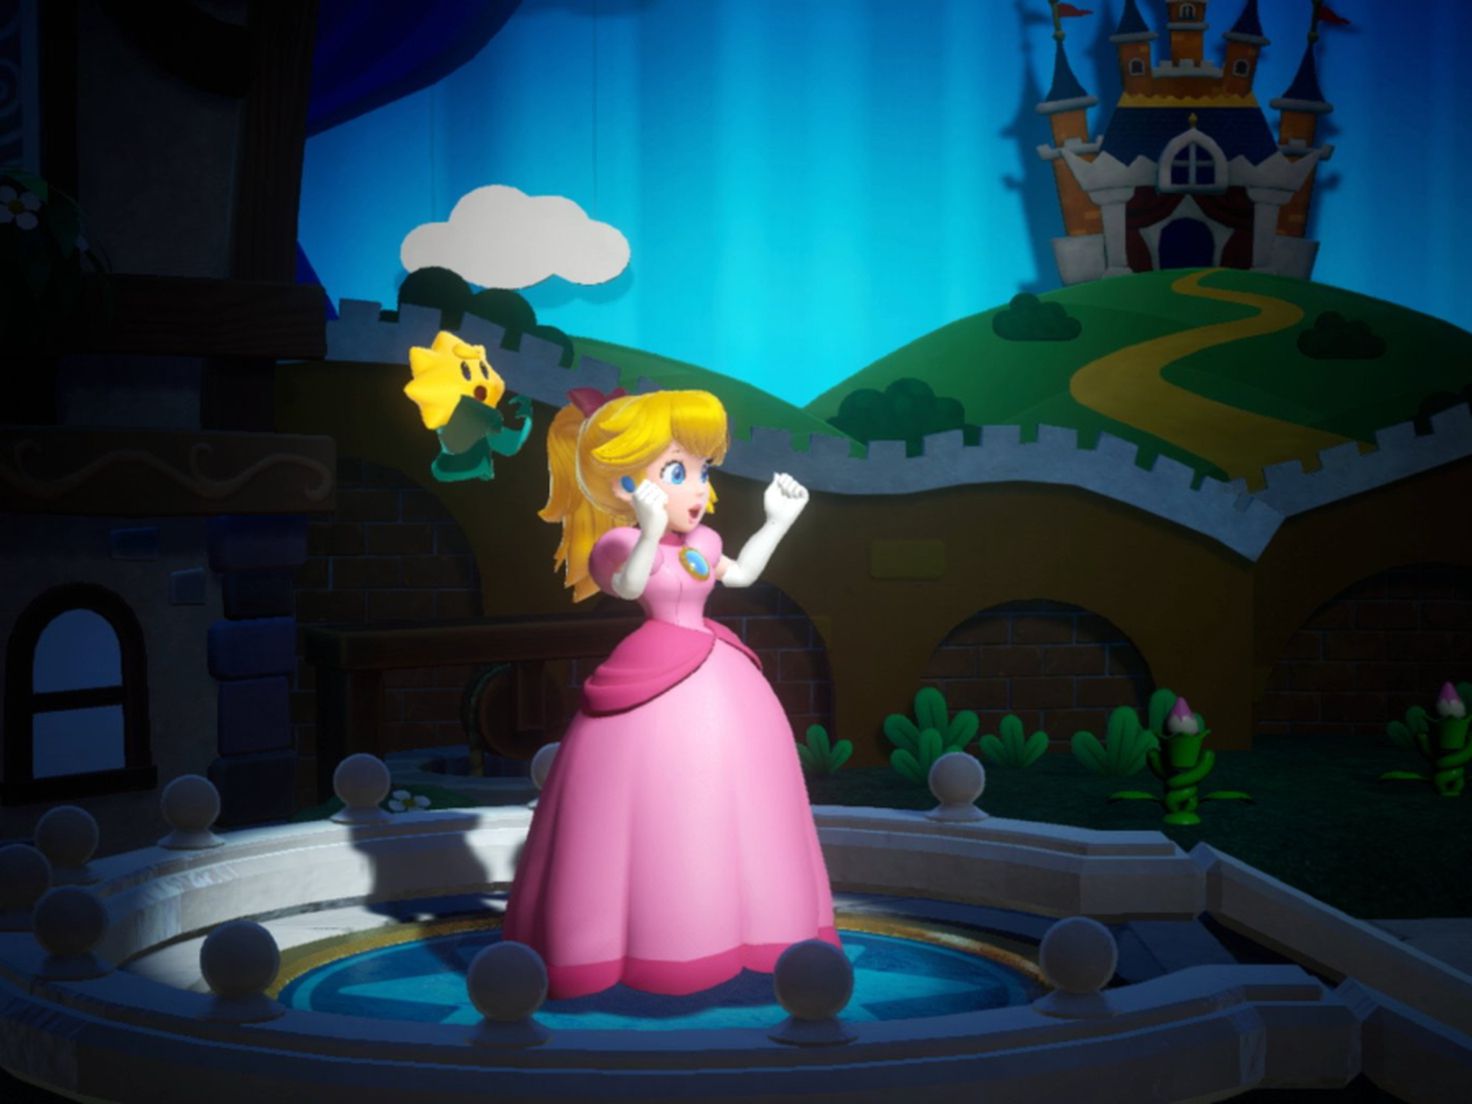 Peach takes control in a new game for Nintendo first trailer - Meristation